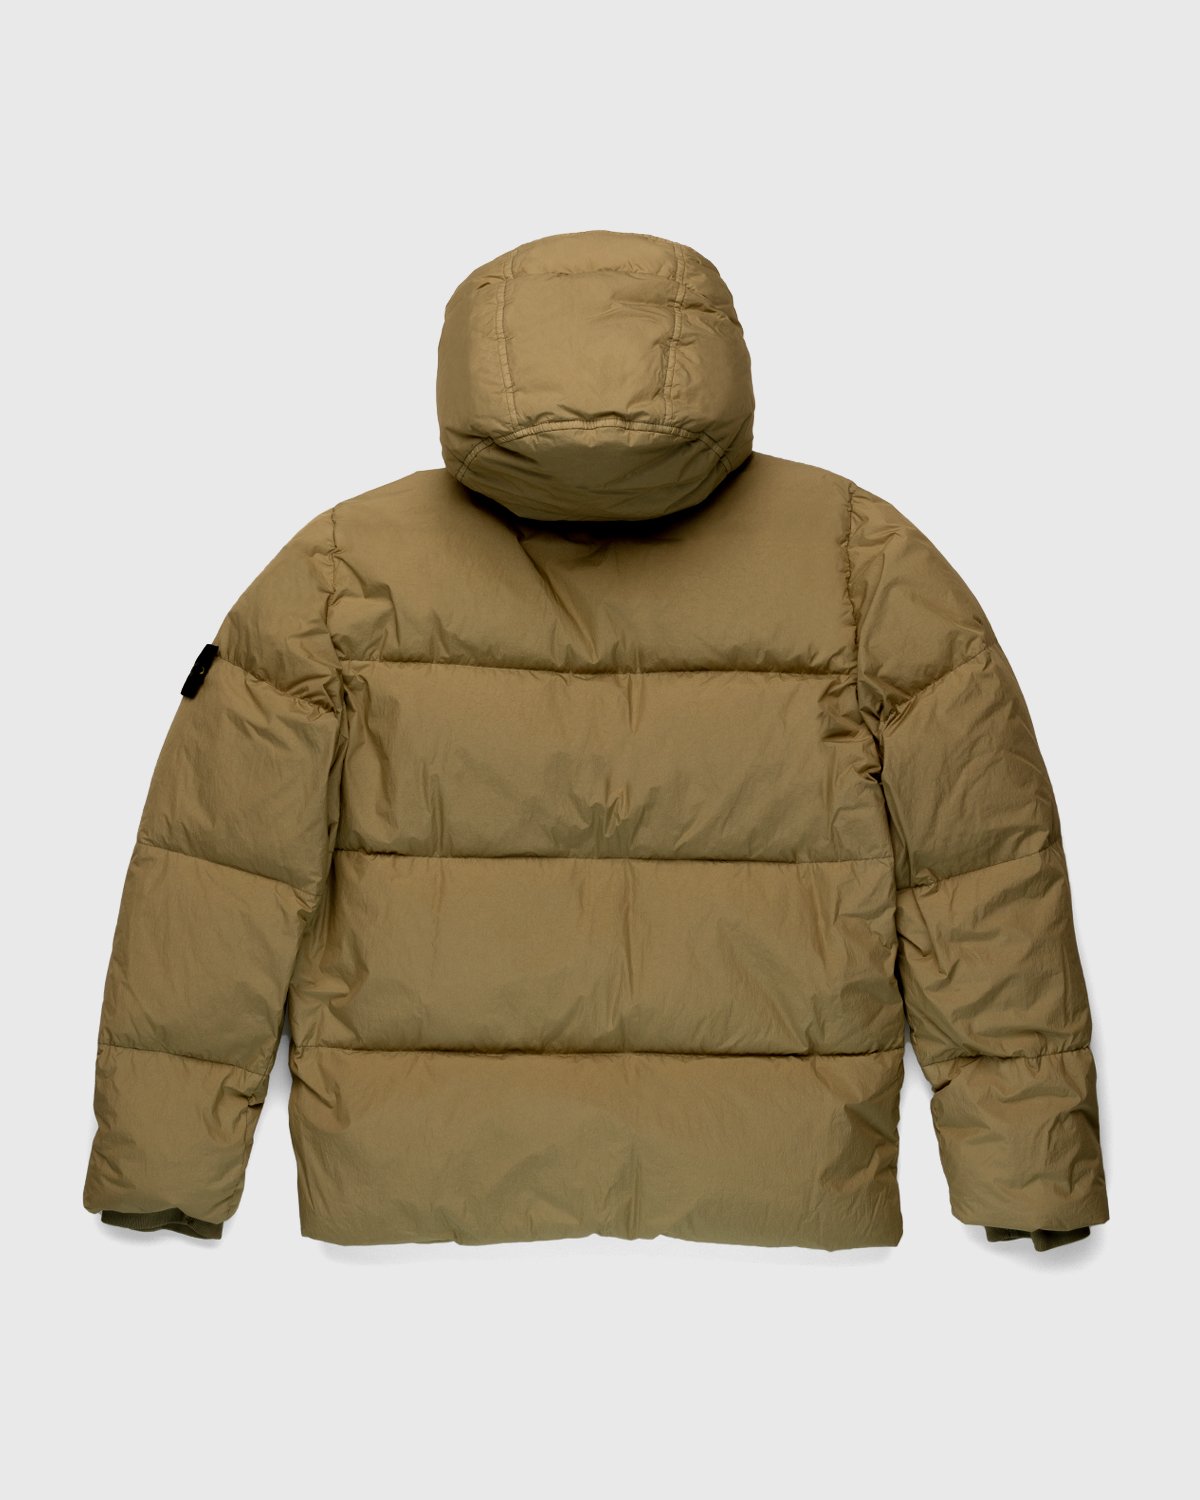 Stone Island - Real Down Jacket Natural Beige - Clothing - Beige - Image 2